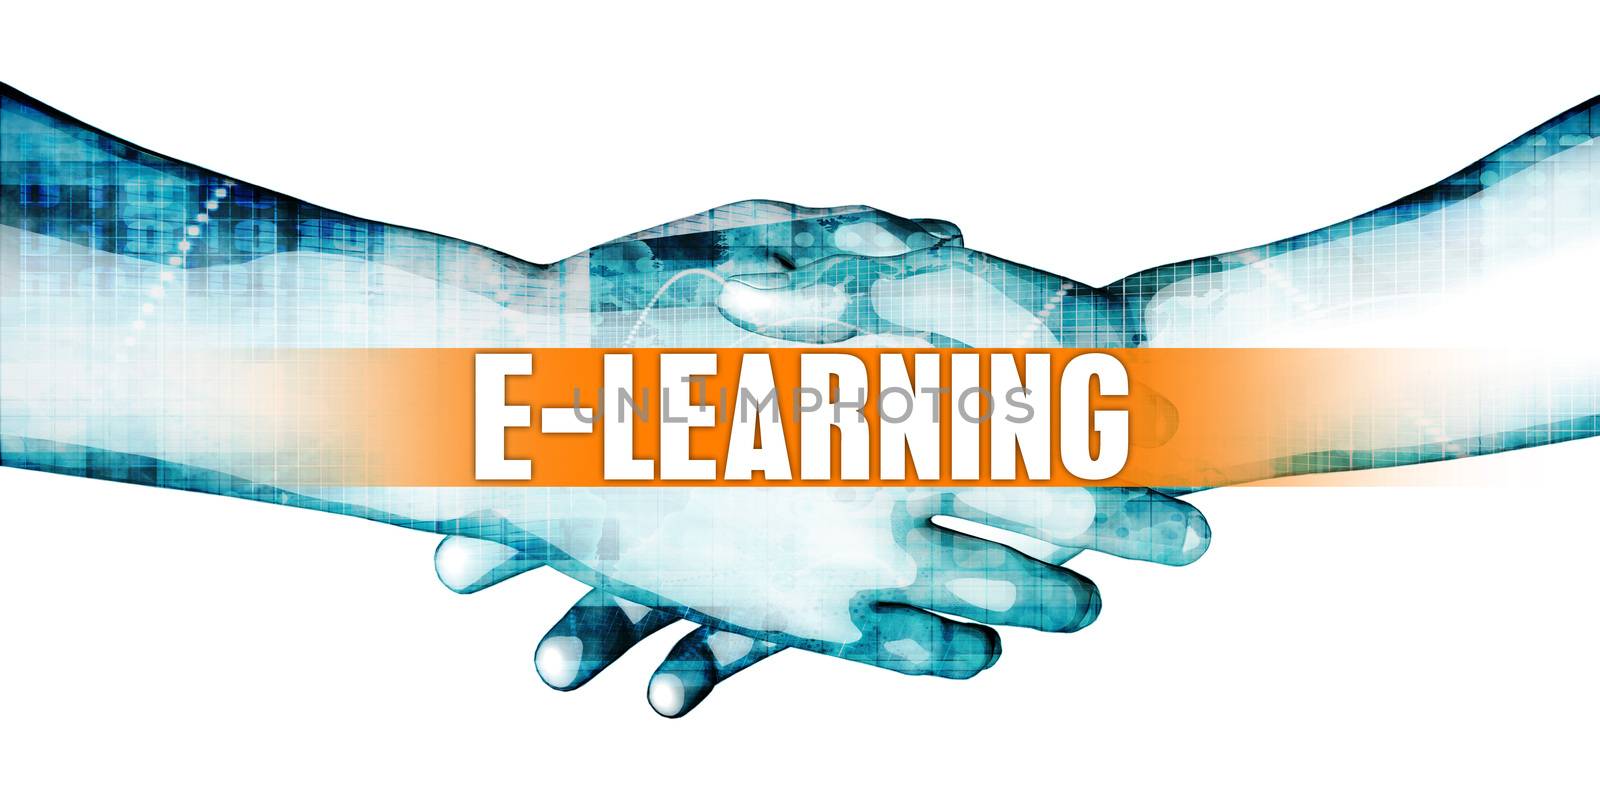 E-learning by kentoh